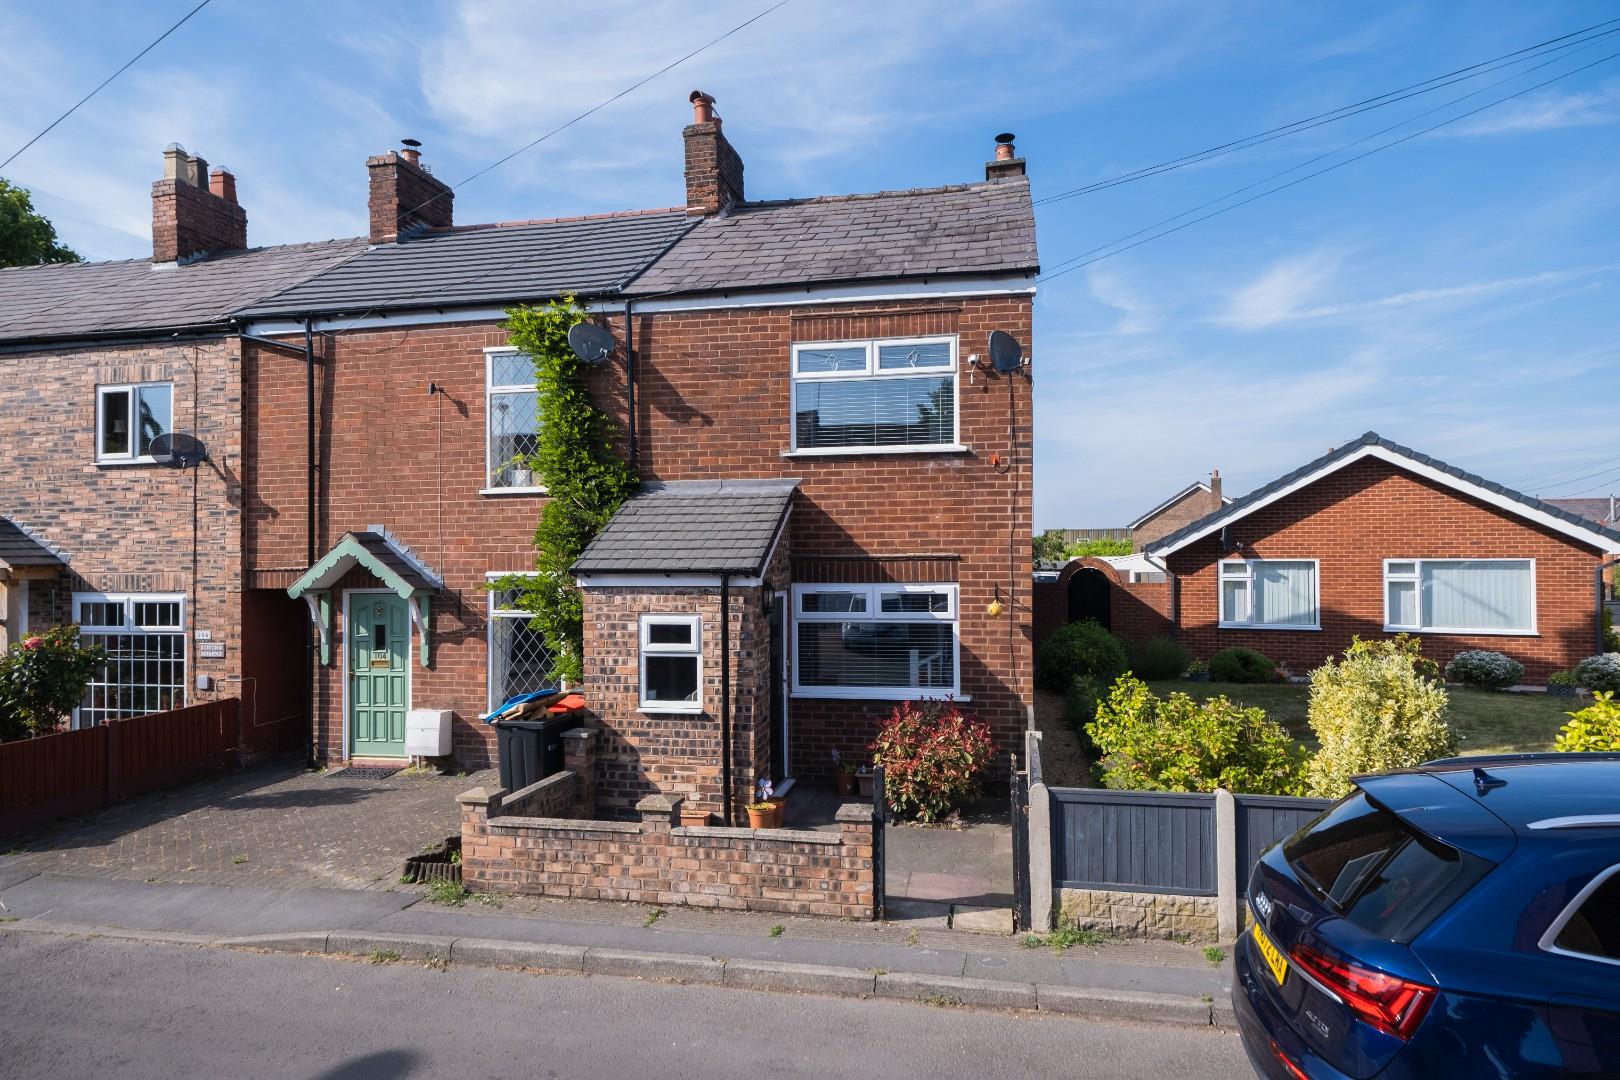 2 bedroom  End Terrace House for Sale in Northwich